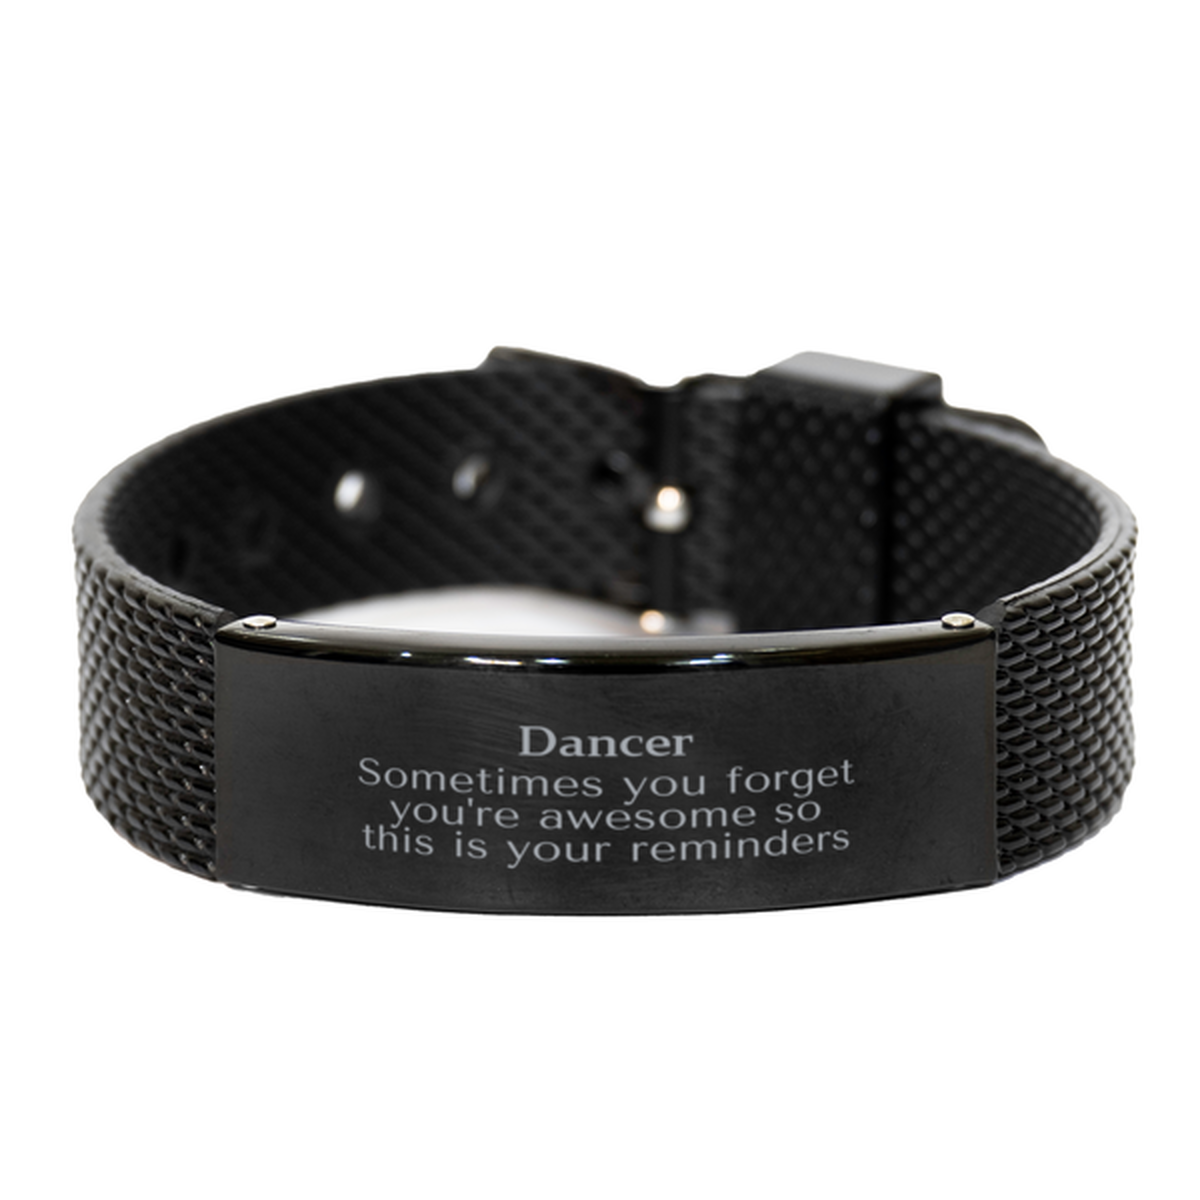 Sentimental Dancer Black Shark Mesh Bracelet, Dancer Sometimes you forget you're awesome so this is your reminders, Graduation Christmas Birthday Gifts for Dancer, Men, Women, Coworkers